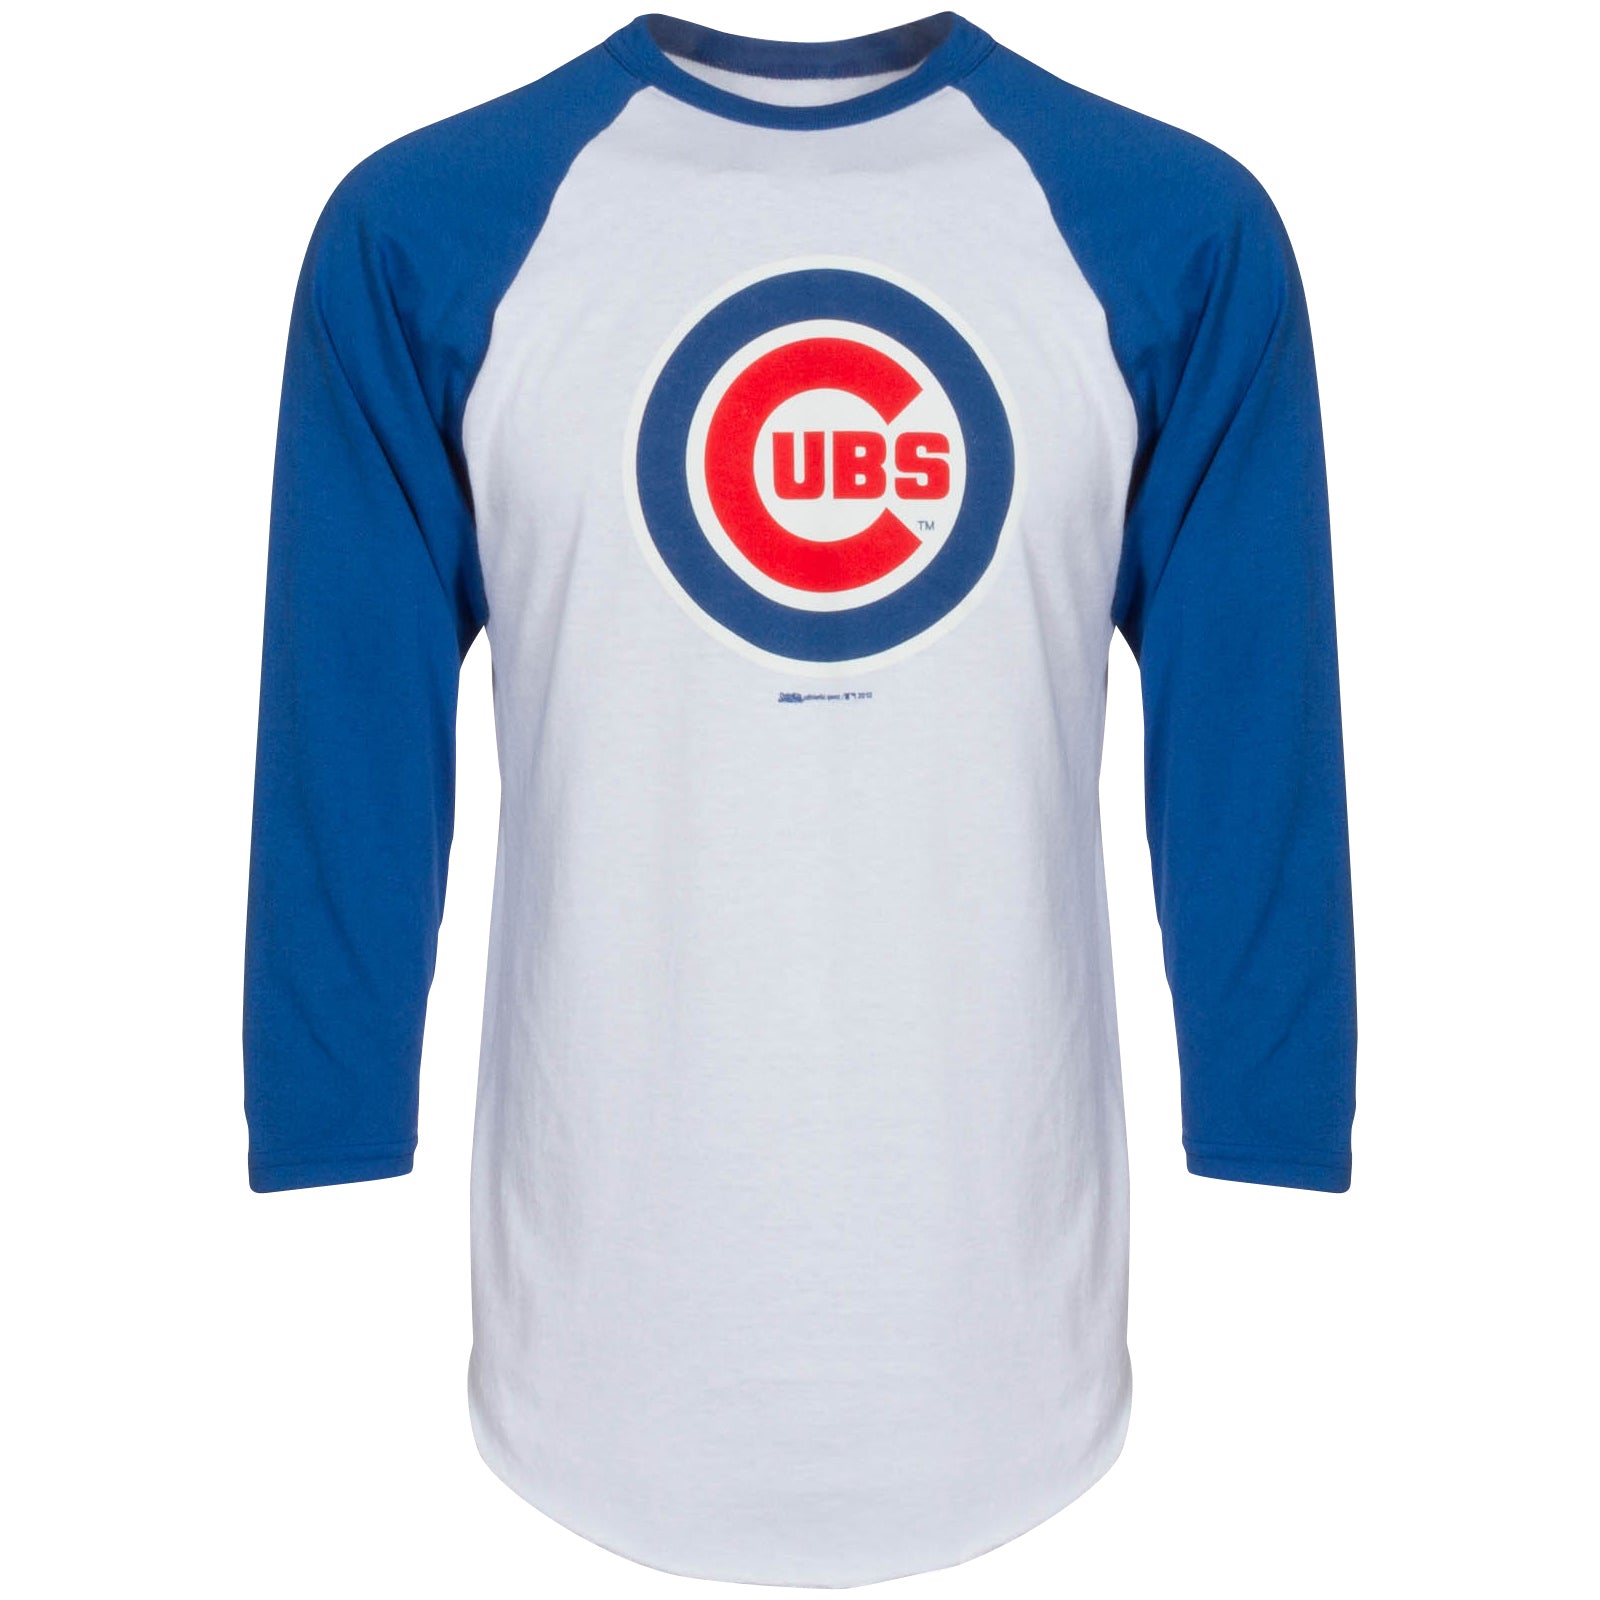 Chicago Cubs Stitches Youth Raglan T-Shirt - Heathered Royal